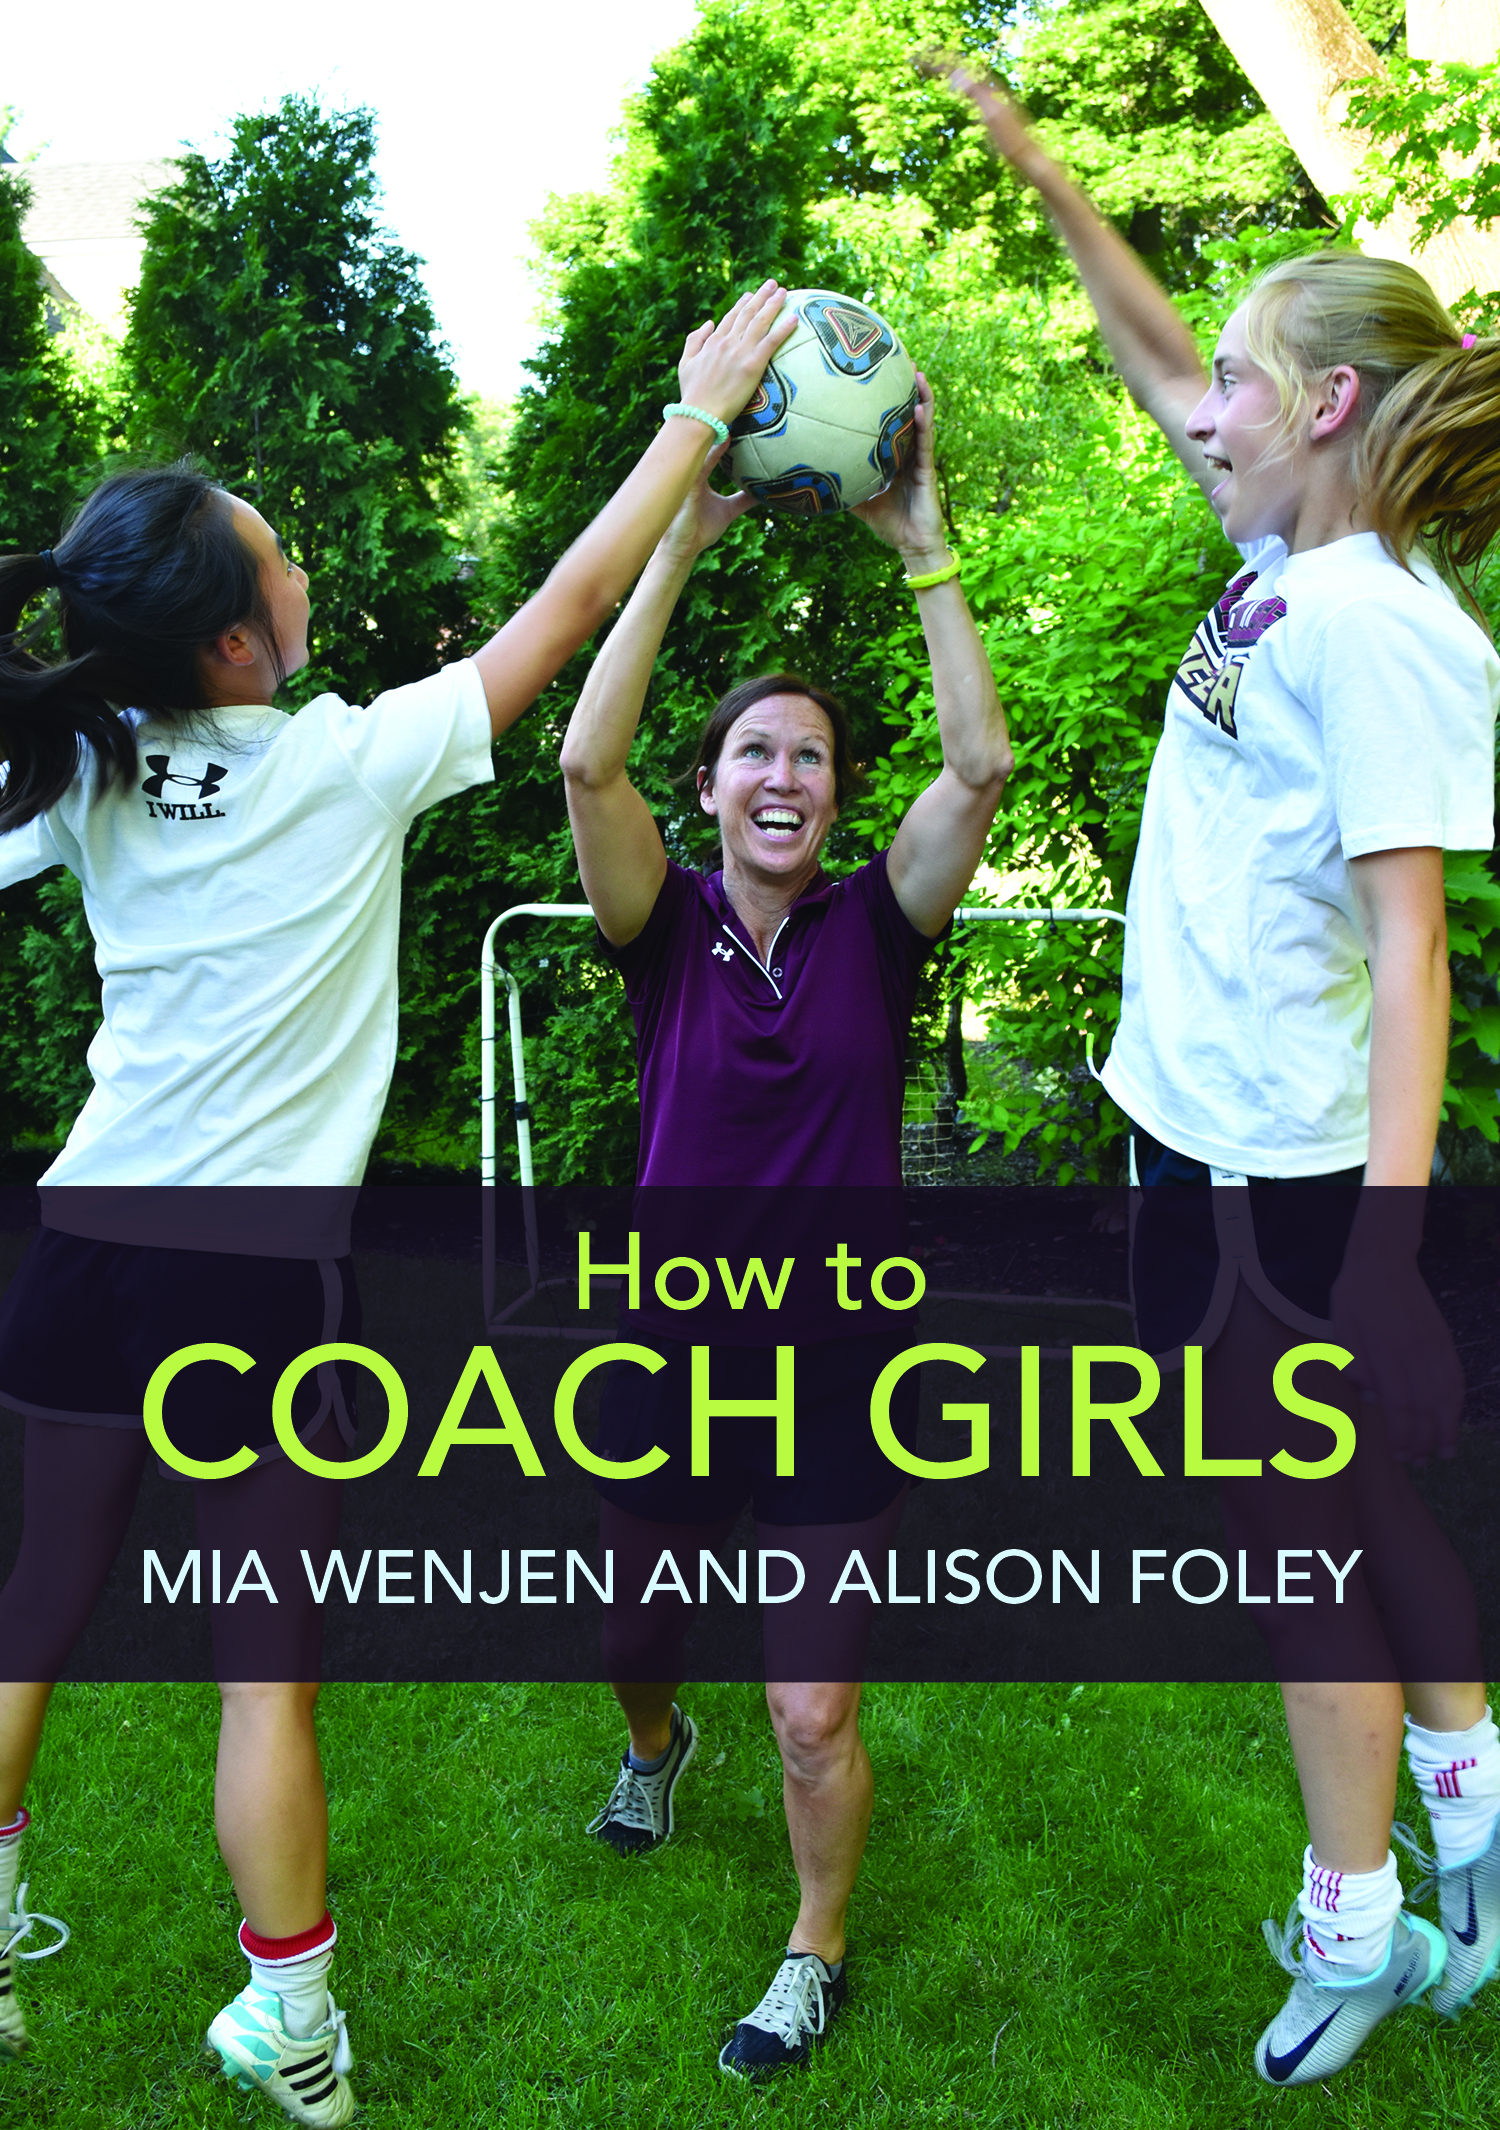 Parents: Here’s how to keep your daughter in sports | HOW TO COACH GIRLS